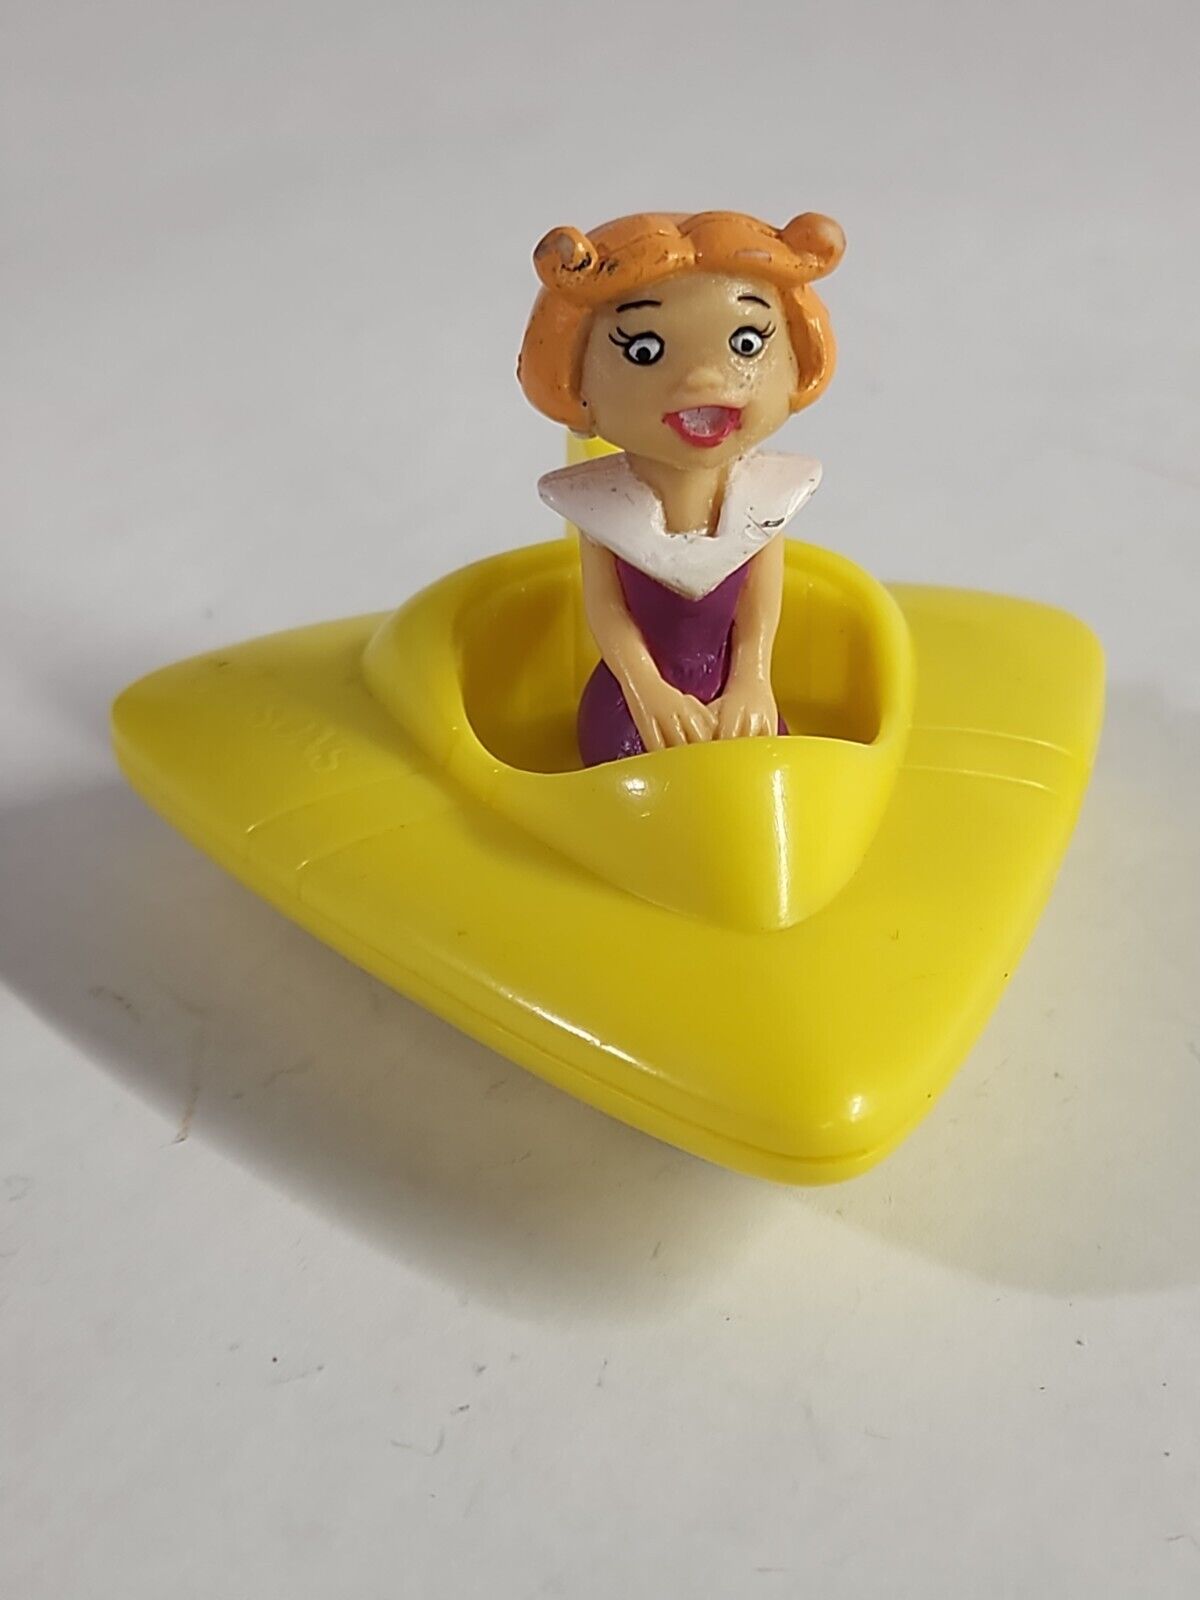 Jetsons Wendy\'s Collectible Toy JANE JETSON 1989 Hanna Barbera 